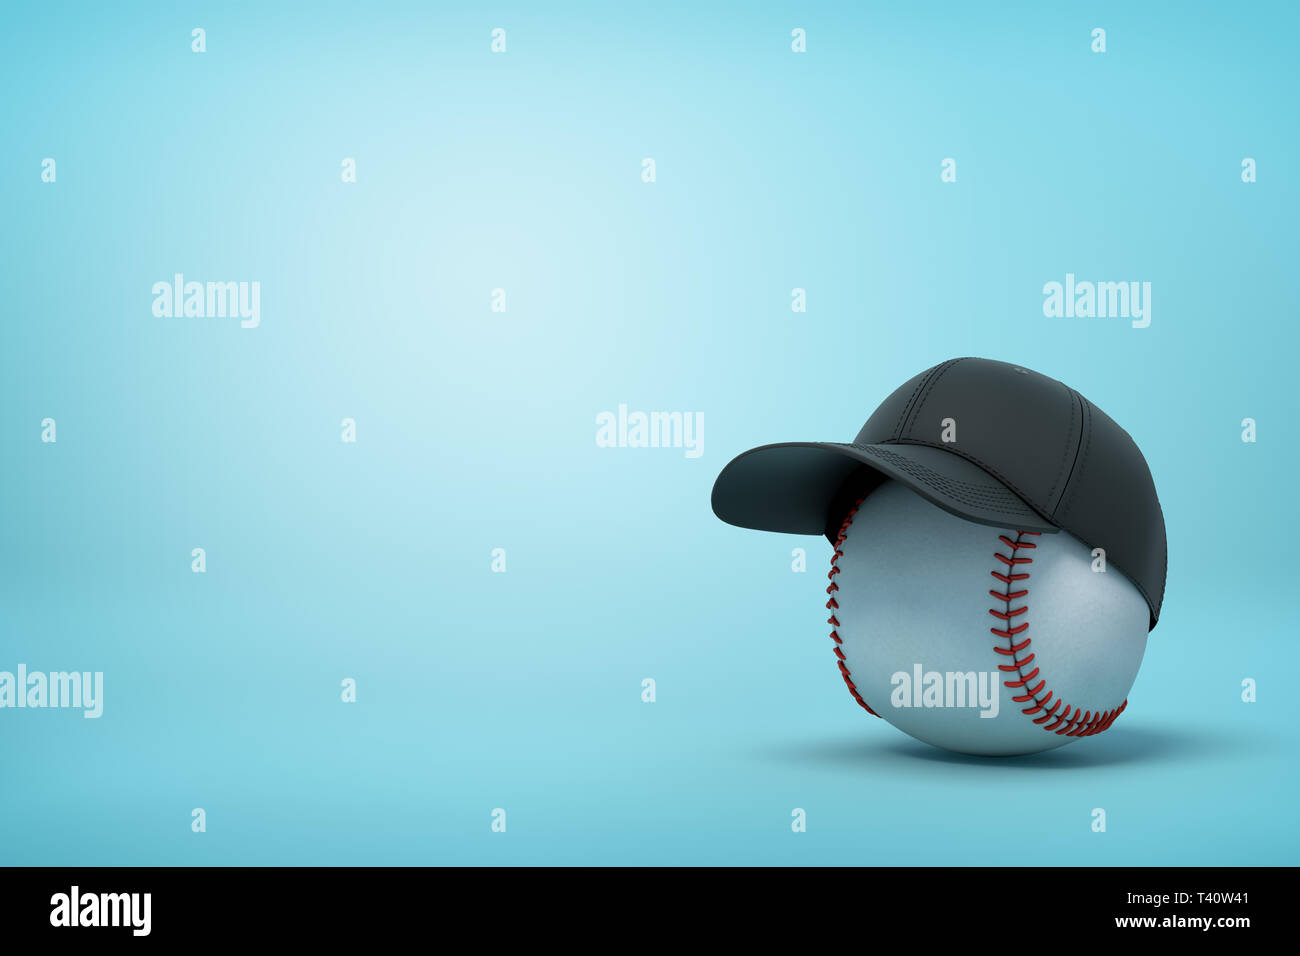 3d rendering of baseball wearing black baseball cap on the right of image with copy space on the rest of light blue background. Stock Photo